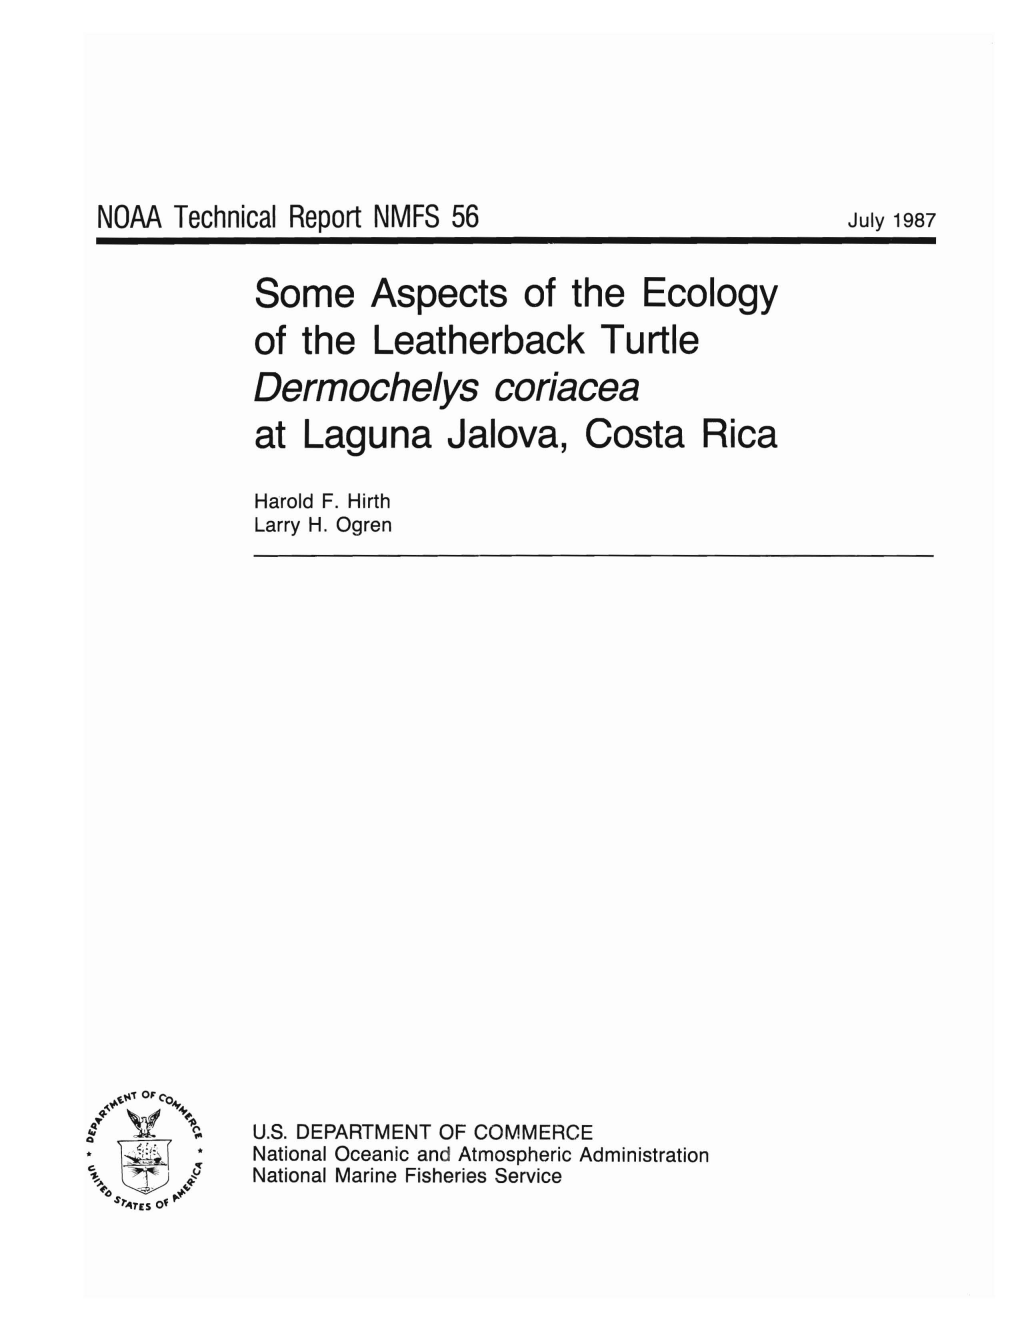 TR 56. Some Aspects of the Ecology of the Leatherback Turtle Dermochelys